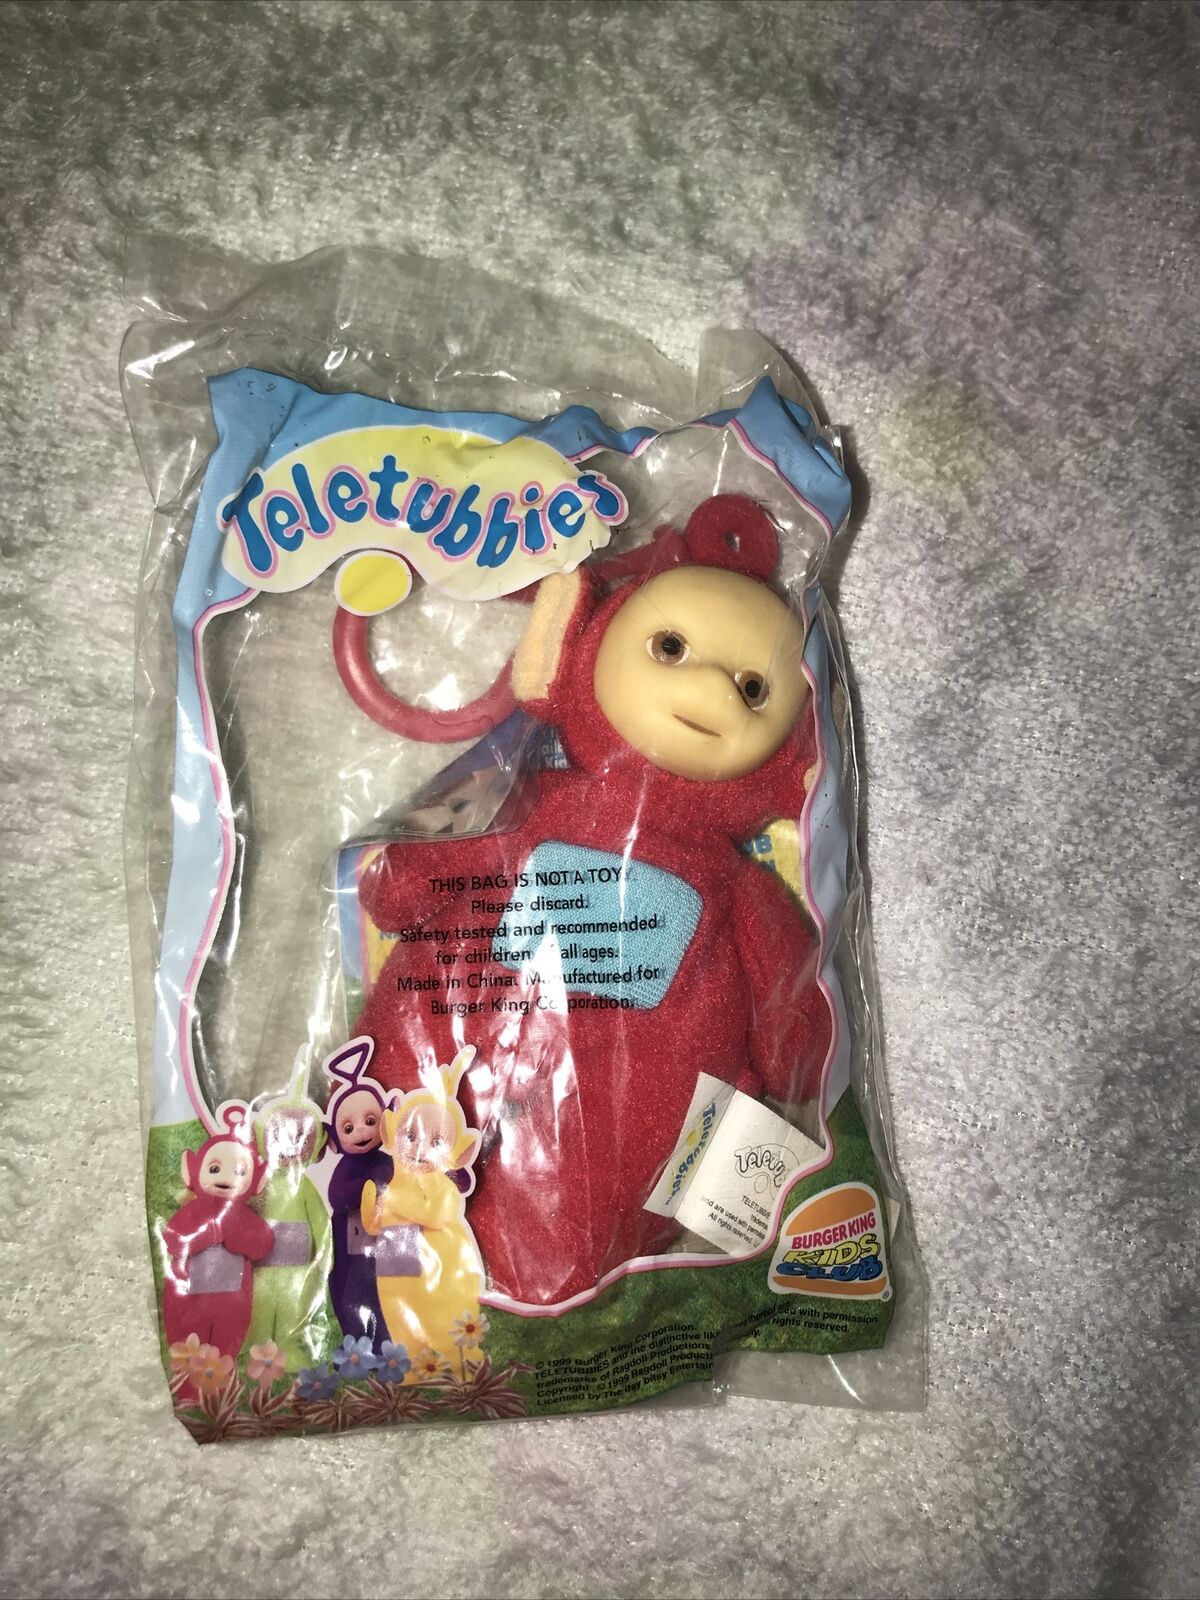 New 1999 Burger King Teletubbies "RED PO" Clip on Beanbag Finger Puppet 